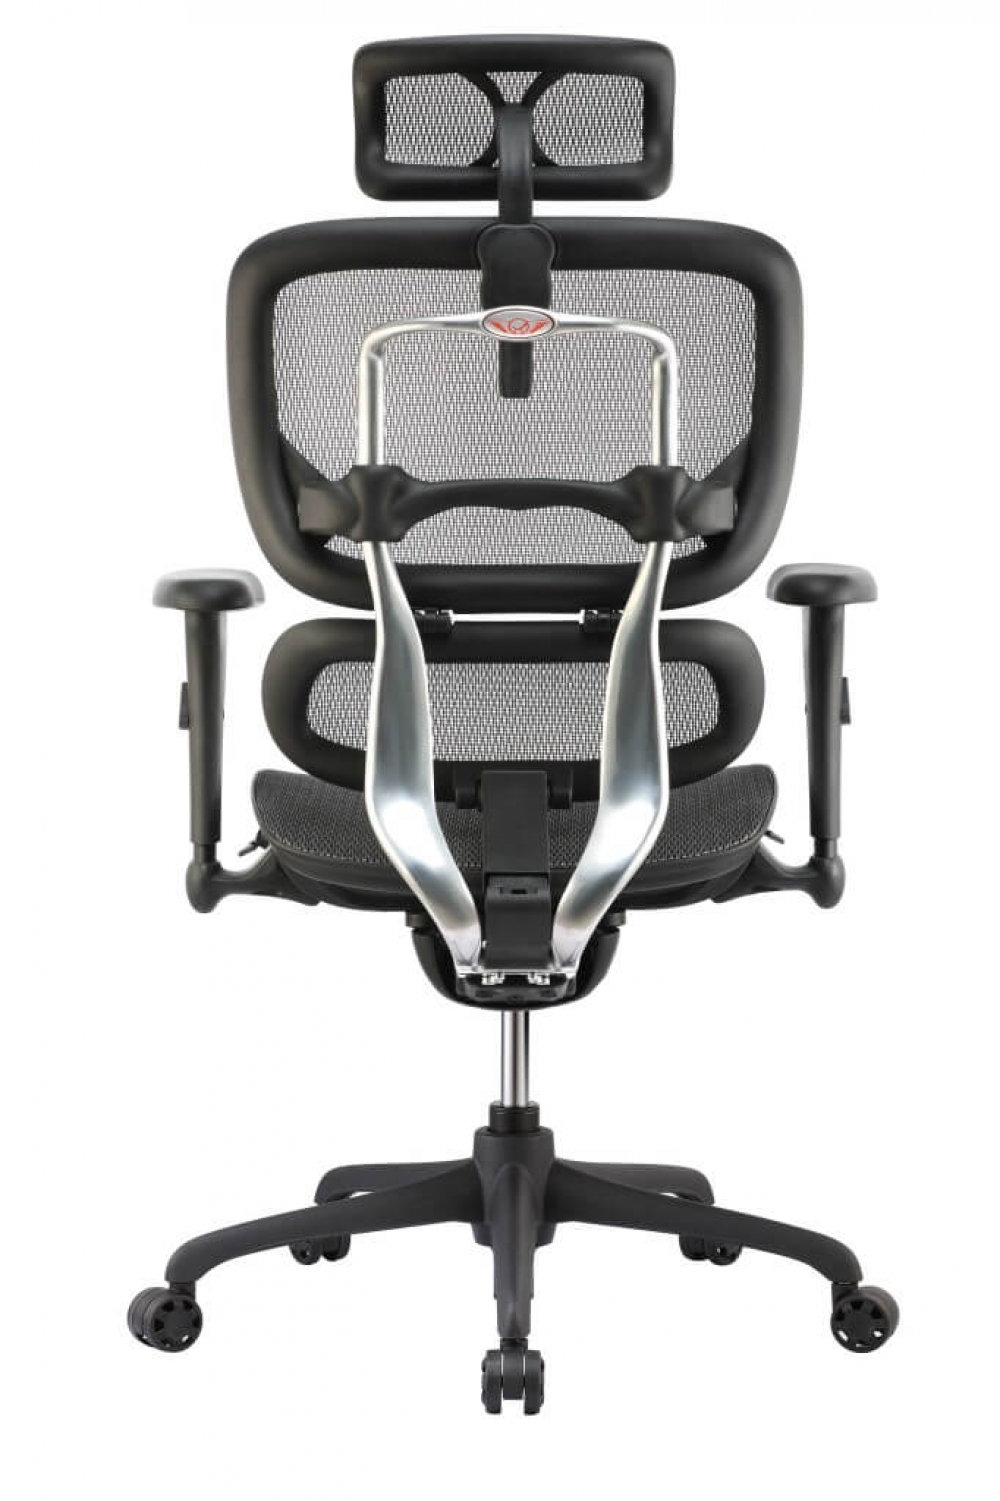 High back office chairs rear view